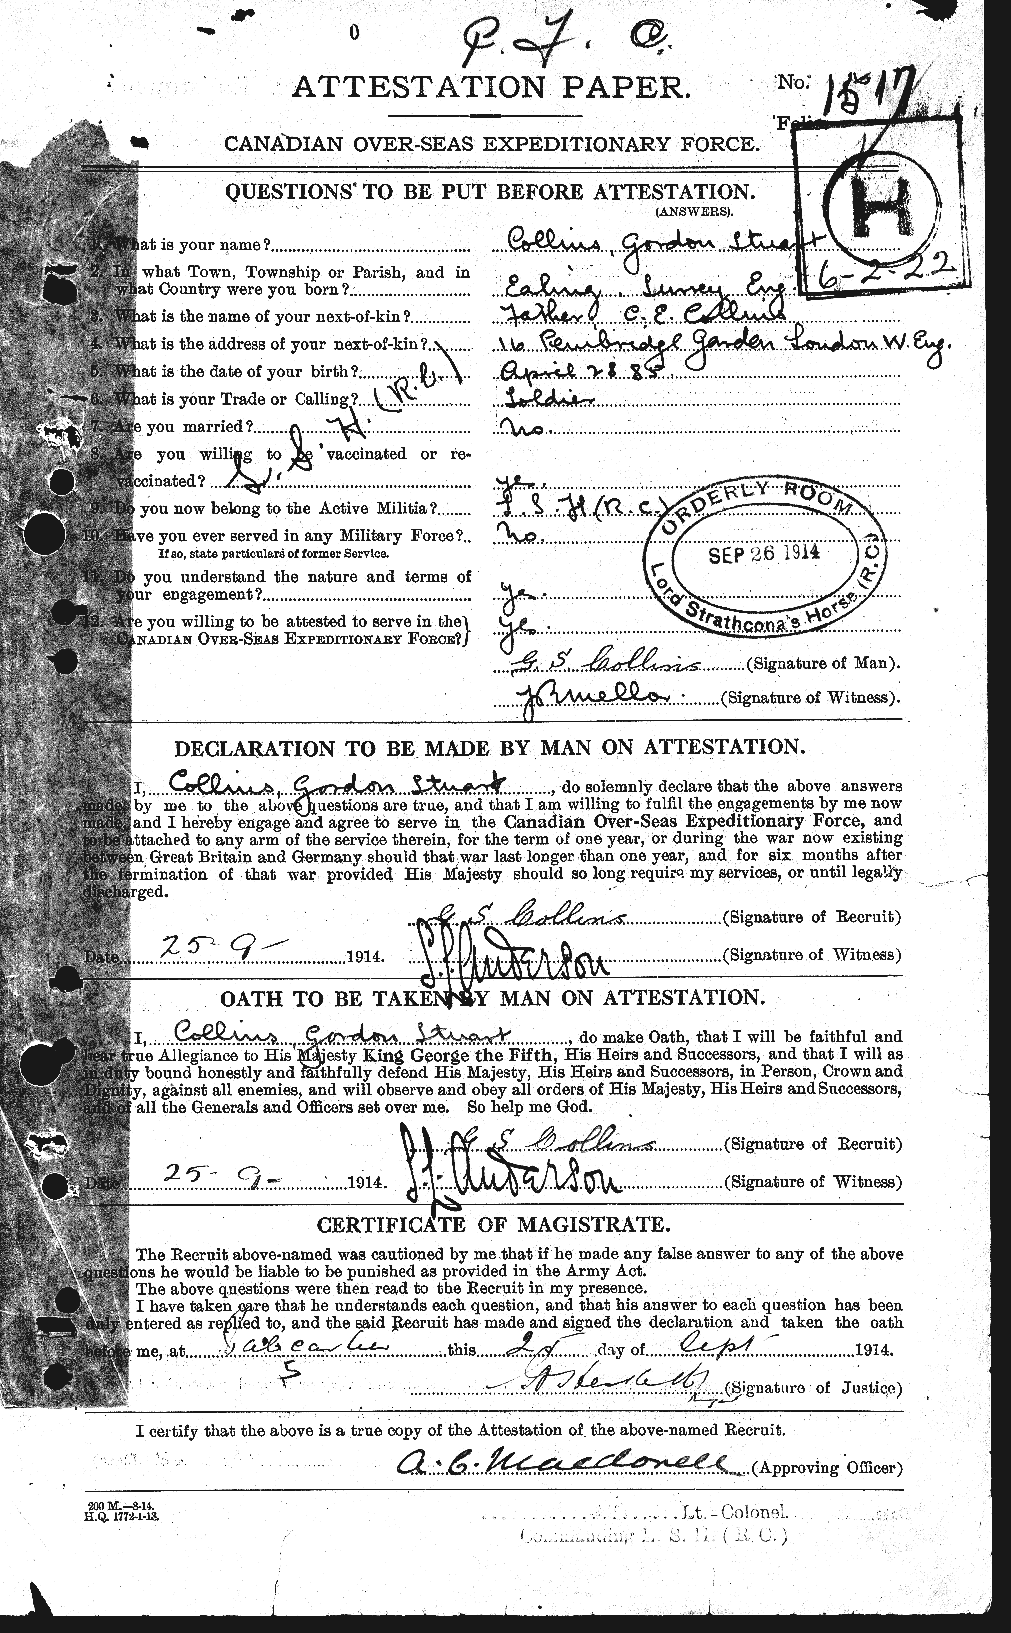 Personnel Records of the First World War - CEF 070524a